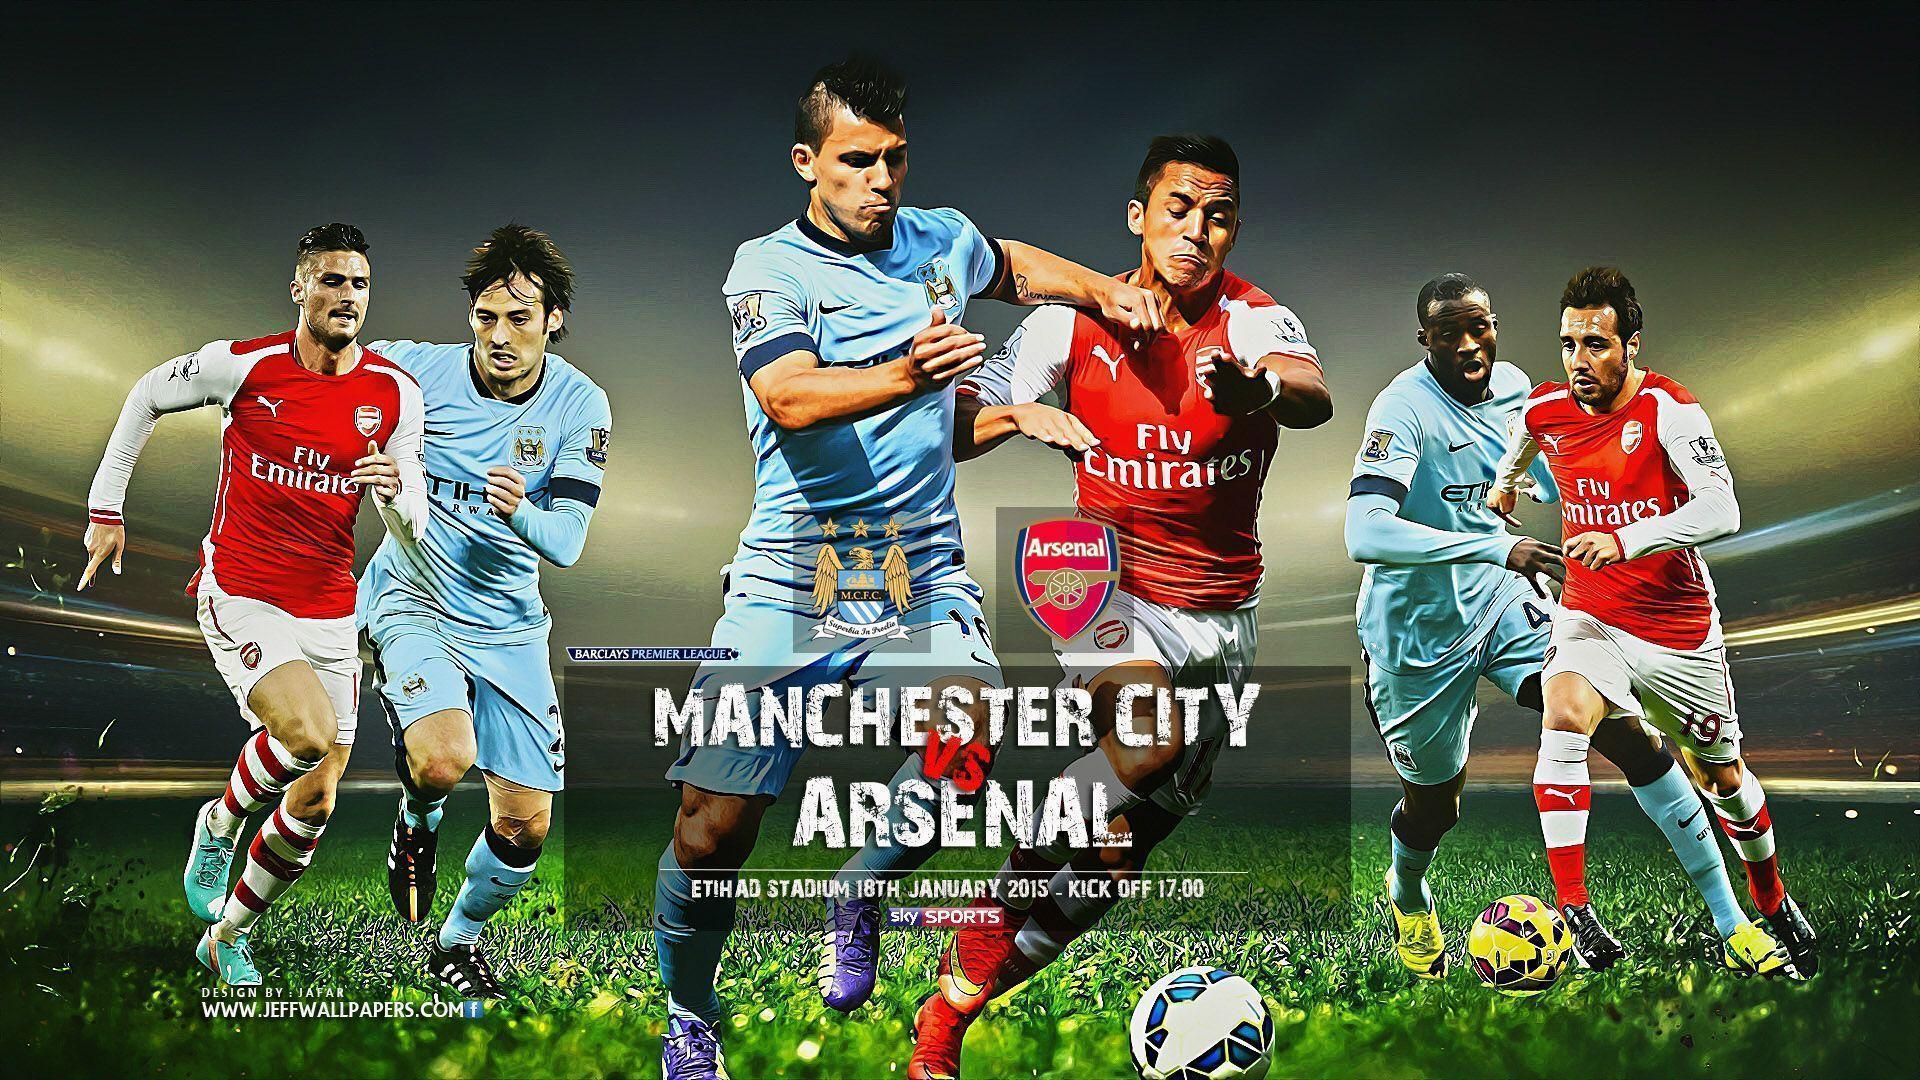 Manchester City Vs Arsenal 2014 2015 BPL Wallpaper Wide Or HD